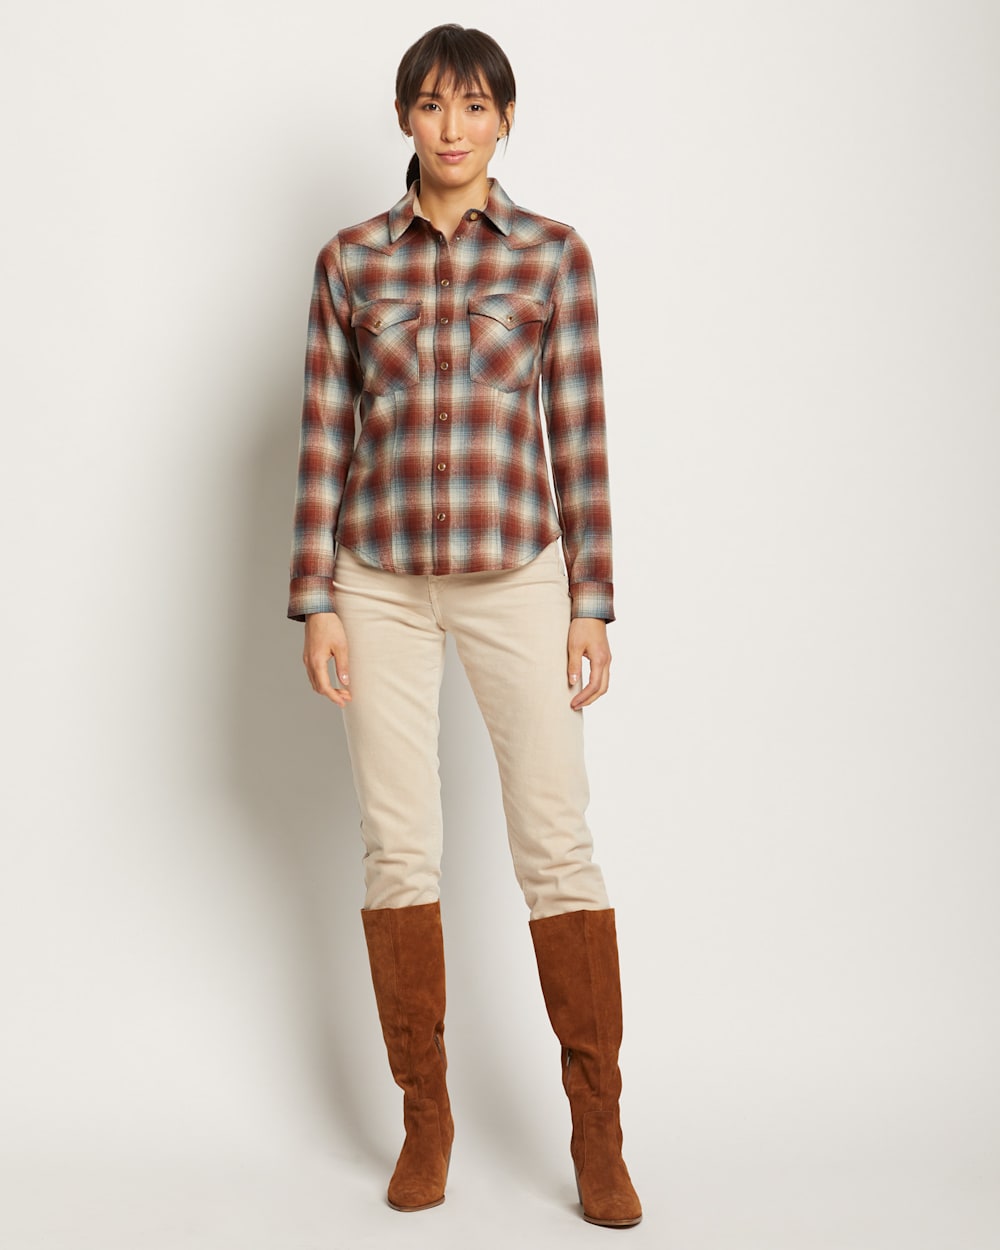 ALTERNATE VIEW OF WOMEN'S SNAP-FRONT CANYON SHIRT IN RUST/BLUE PLAID image number 2